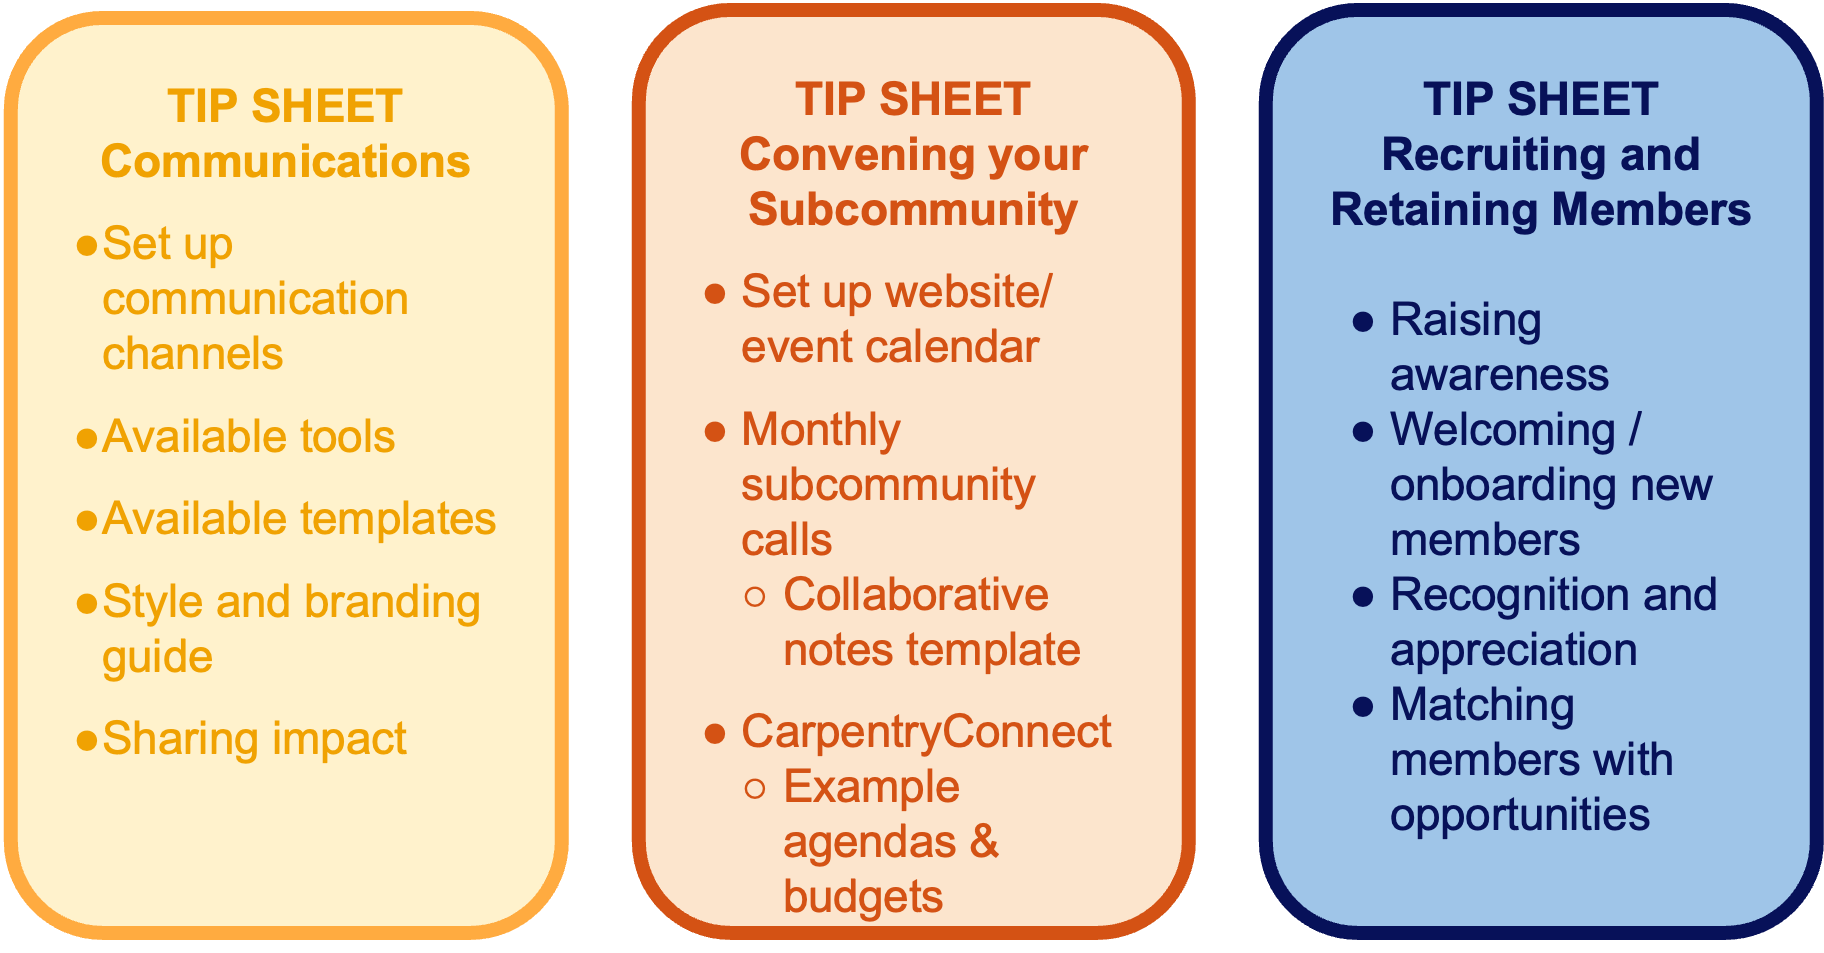 Examples of three tip sheets that could be created through the program. The communications tip sheet provides information on setting up communication channels, available tools and templates, a style and branding guide, and best practices for sharing impact. The convening your community tip sheet provides information on setting up a website and event calendar, running monthly community calls, and hosting CarpentryConnect events. The recruiting and retaining members tip sheet provides information on raising awareness of your subcommunity, welcoming and onboarding new members, recognition and appreciation, and matching members to available opportunities.